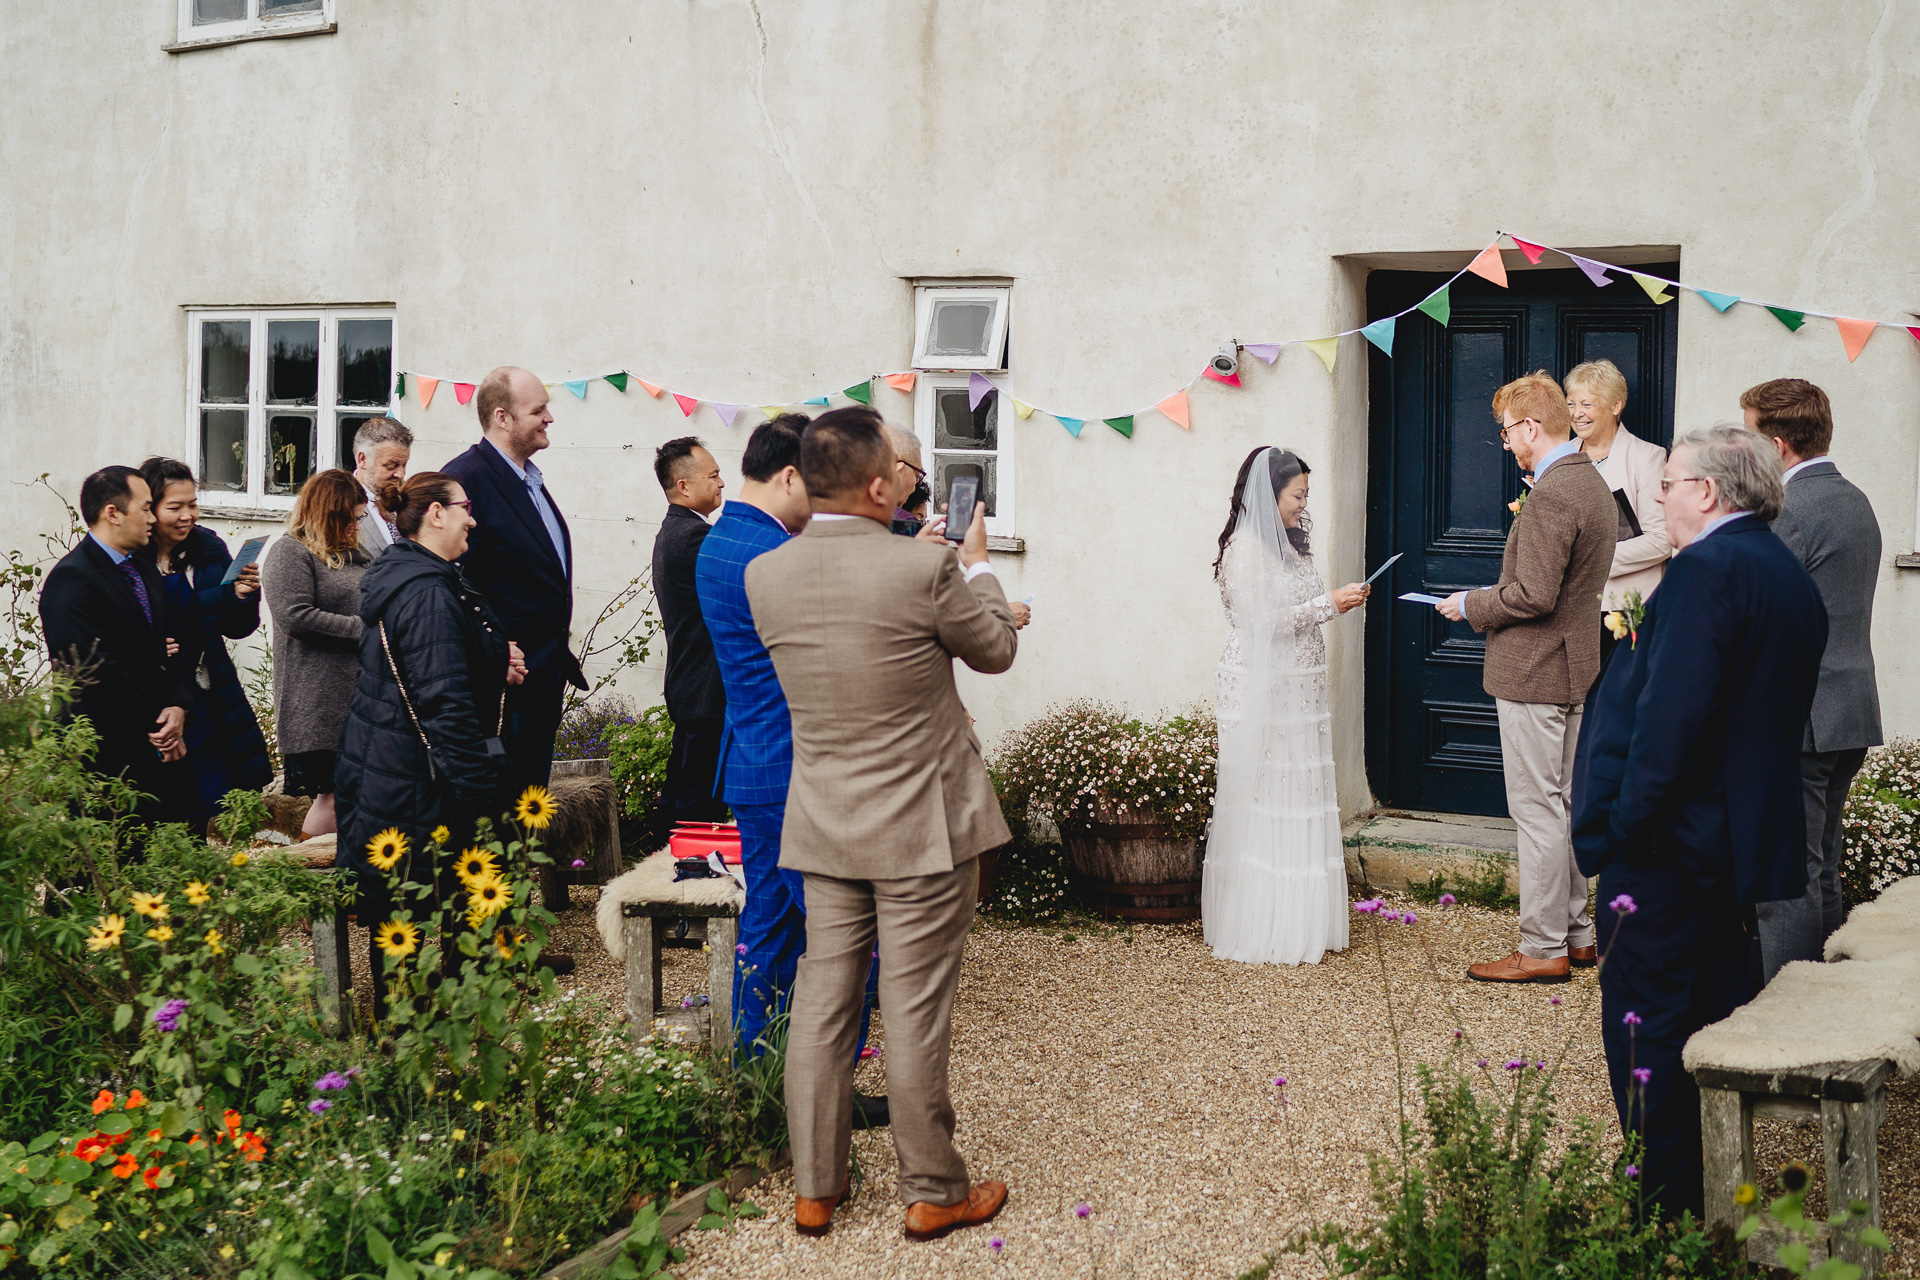 An autumn outdoor wedding ceremony, with the bride and groom reading vows